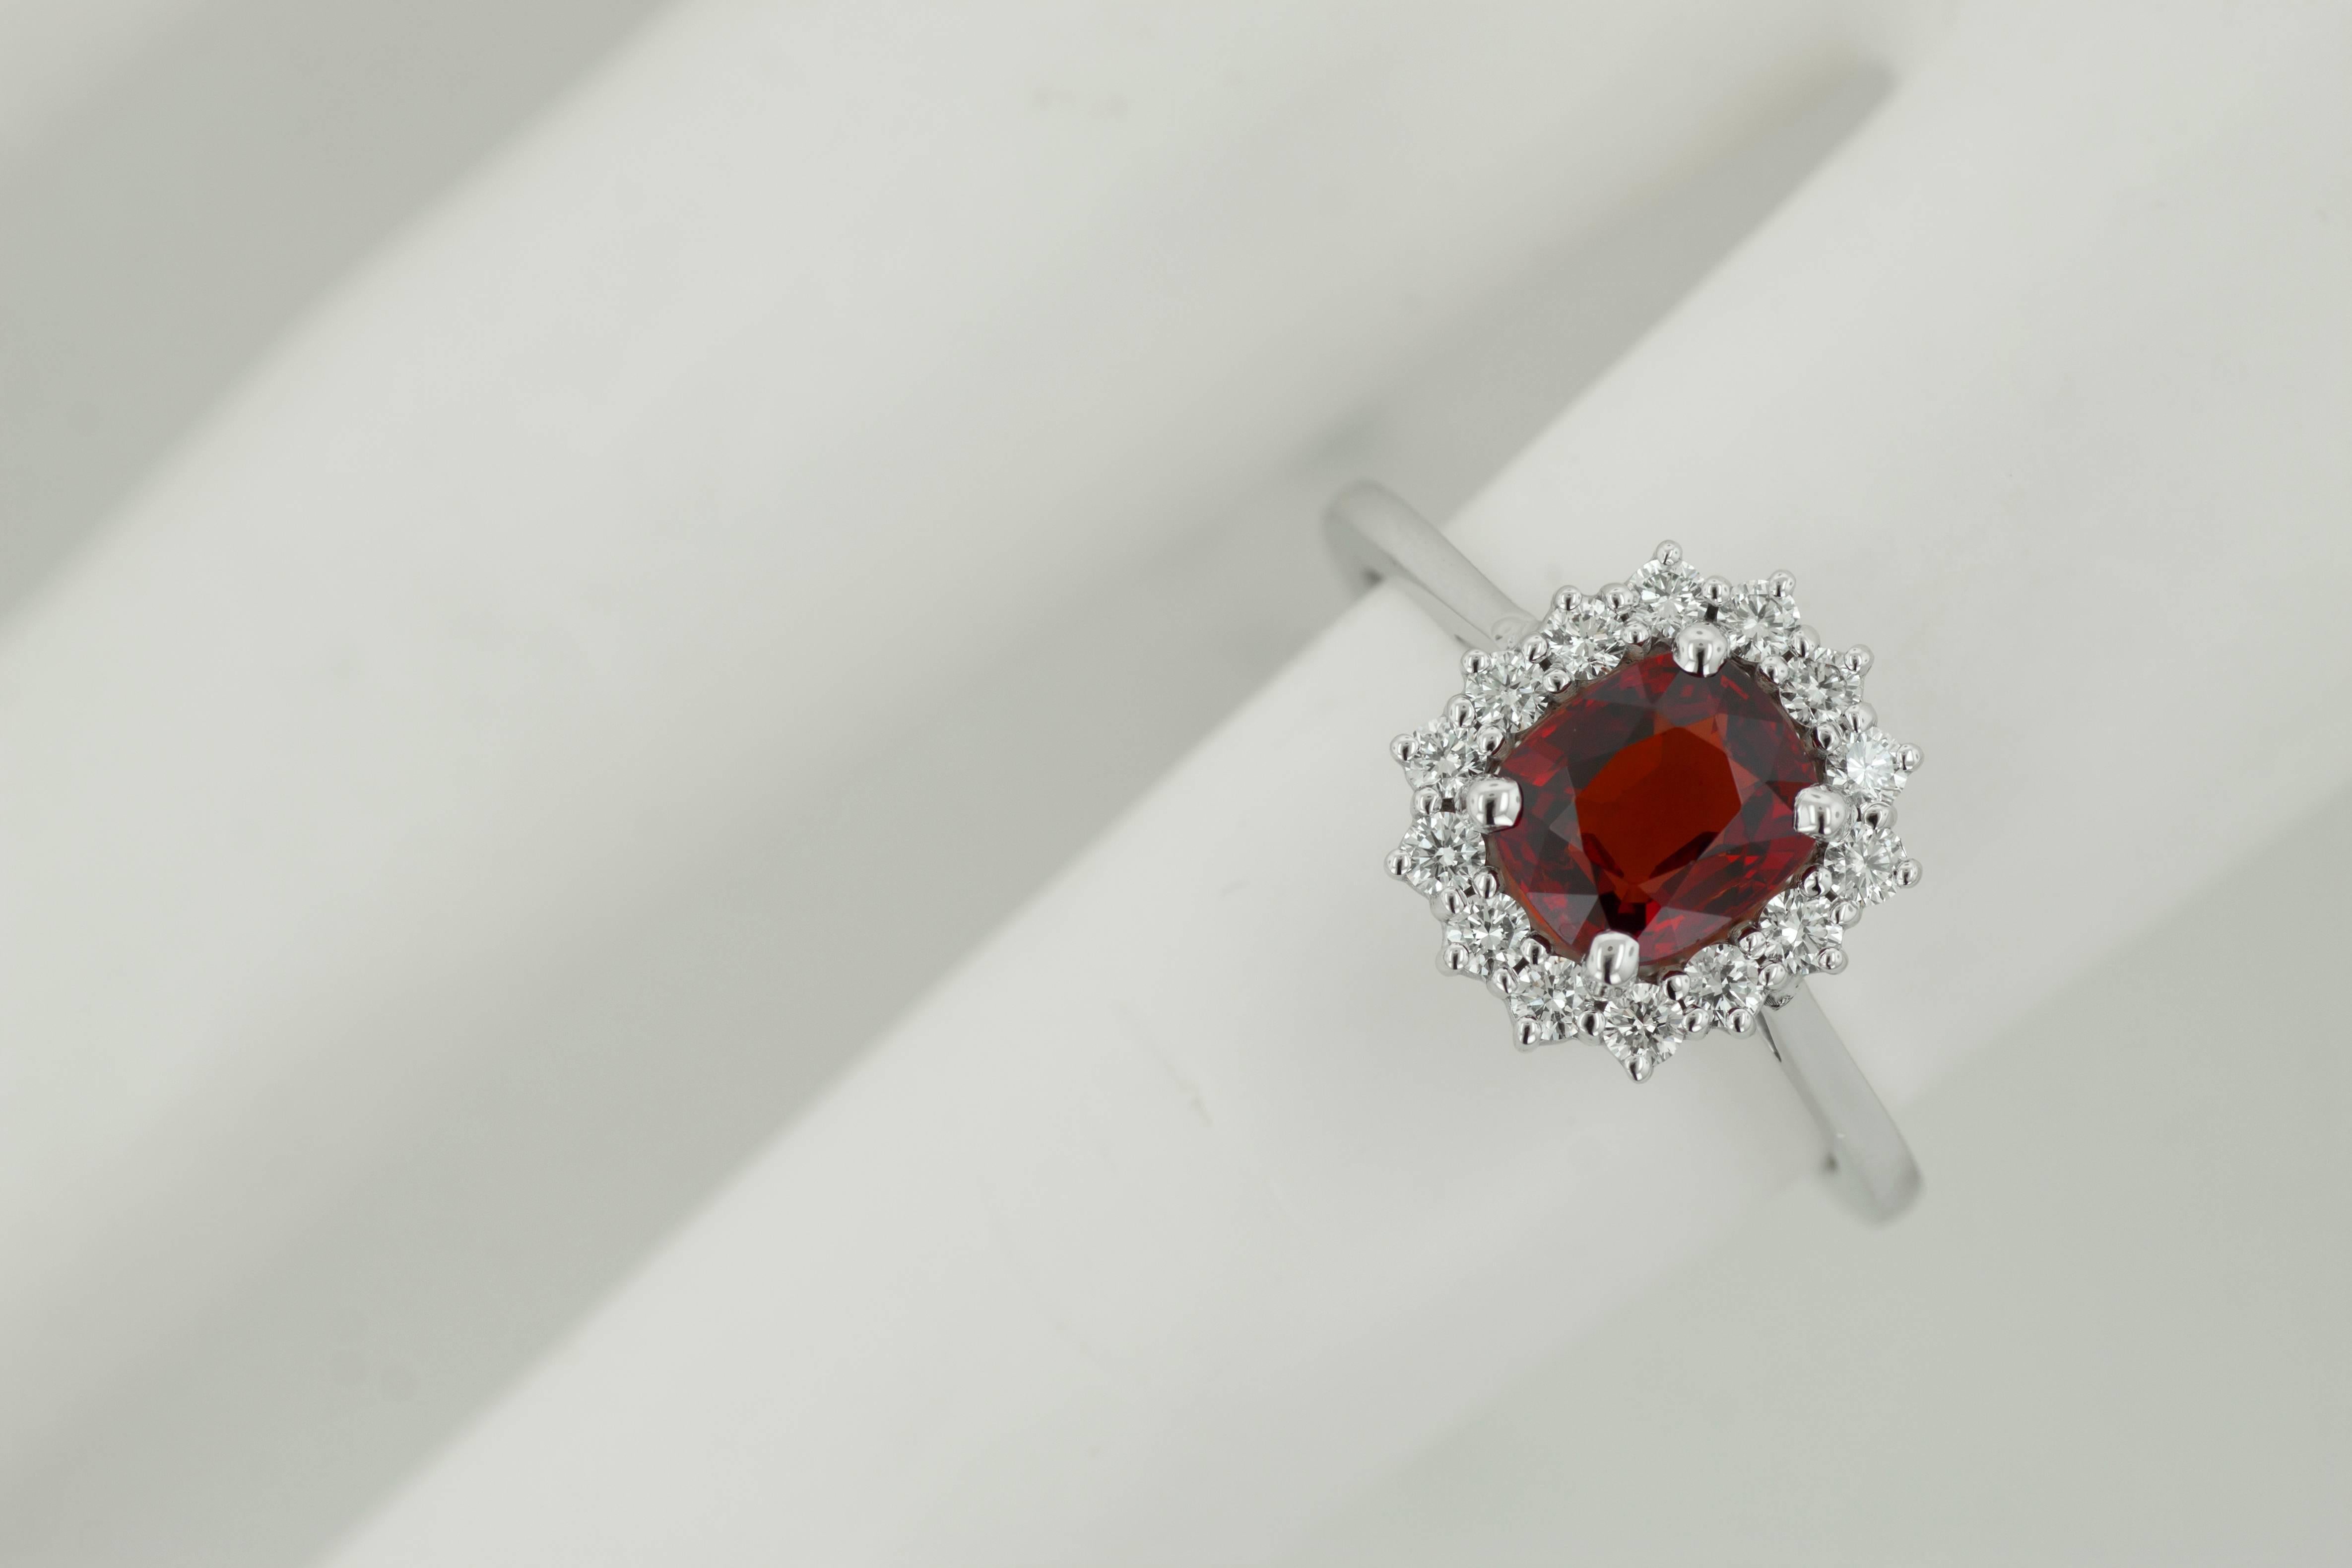 Beautiful Belle Époque inspired spinel and diamond engagement ring by Tears Undressed. This brand new 14 karat white gold hand-made ring is set with an elegant 1.78ct spinel center stone encircled by a beautiful halo of 14 white round diamonds. The